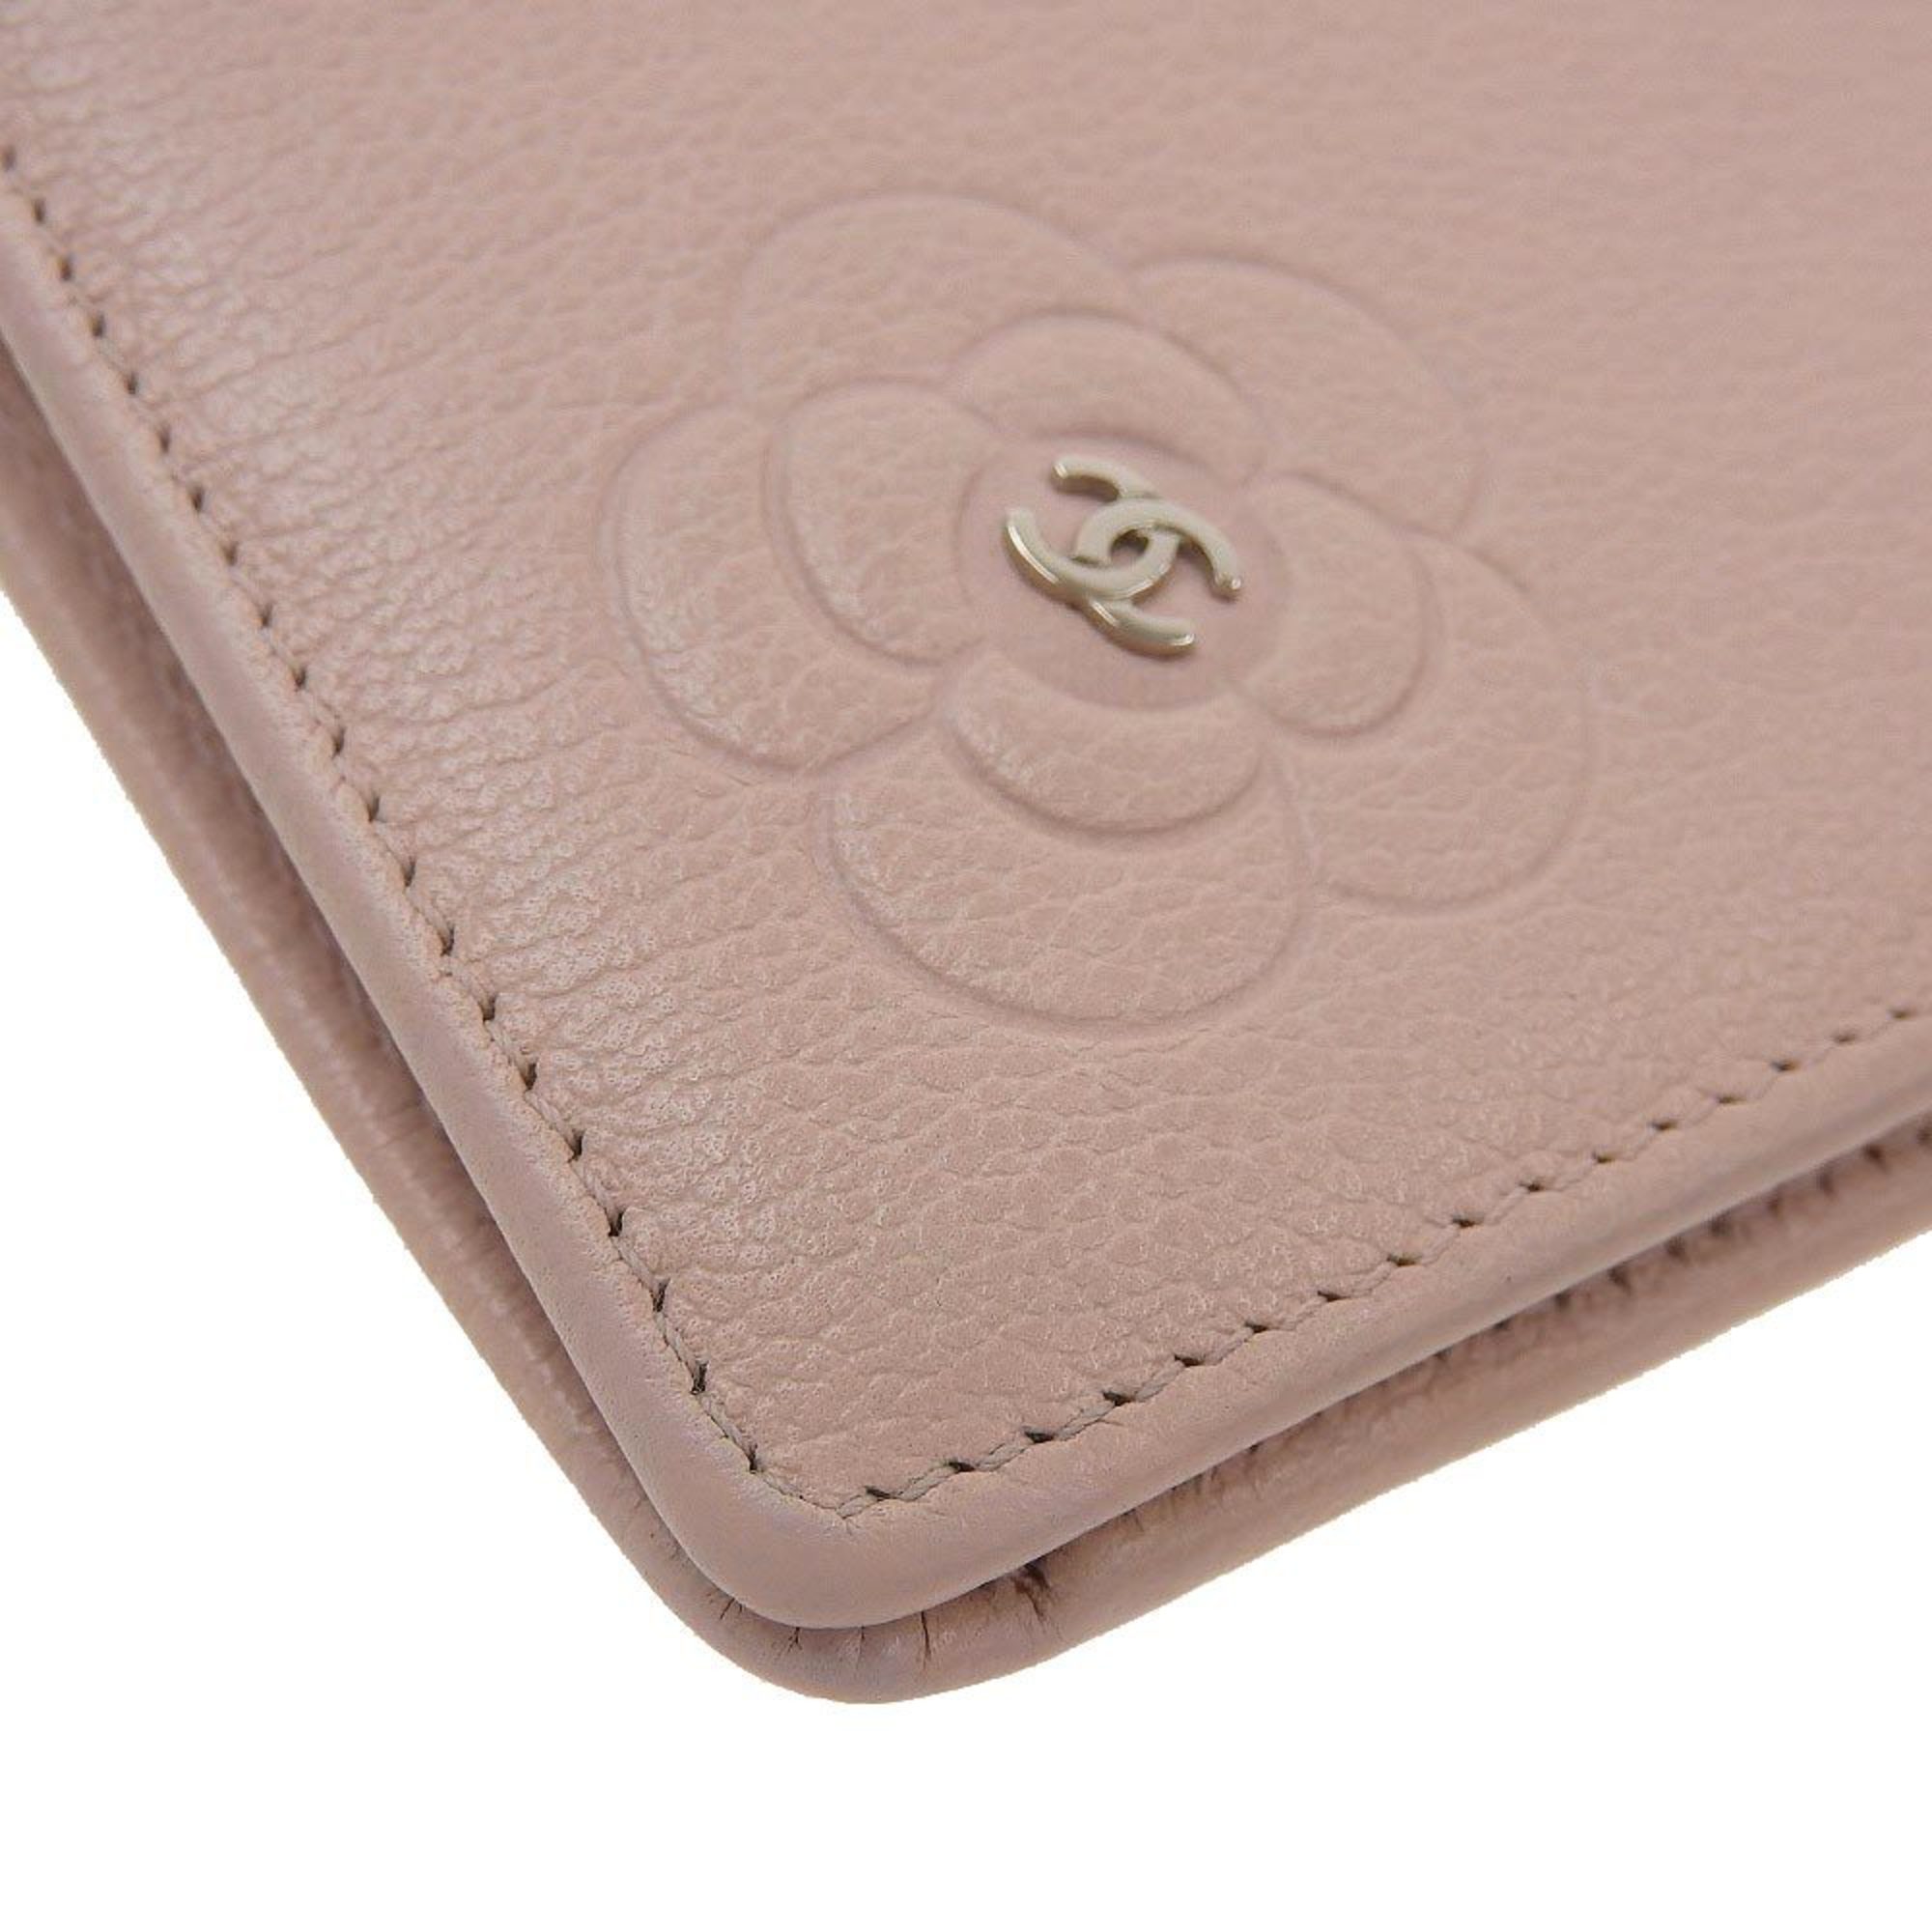 Chanel CHANEL Logo Coco Mark Camellia Bifold Long Wallet with Pink Seal (15 Series) A46511